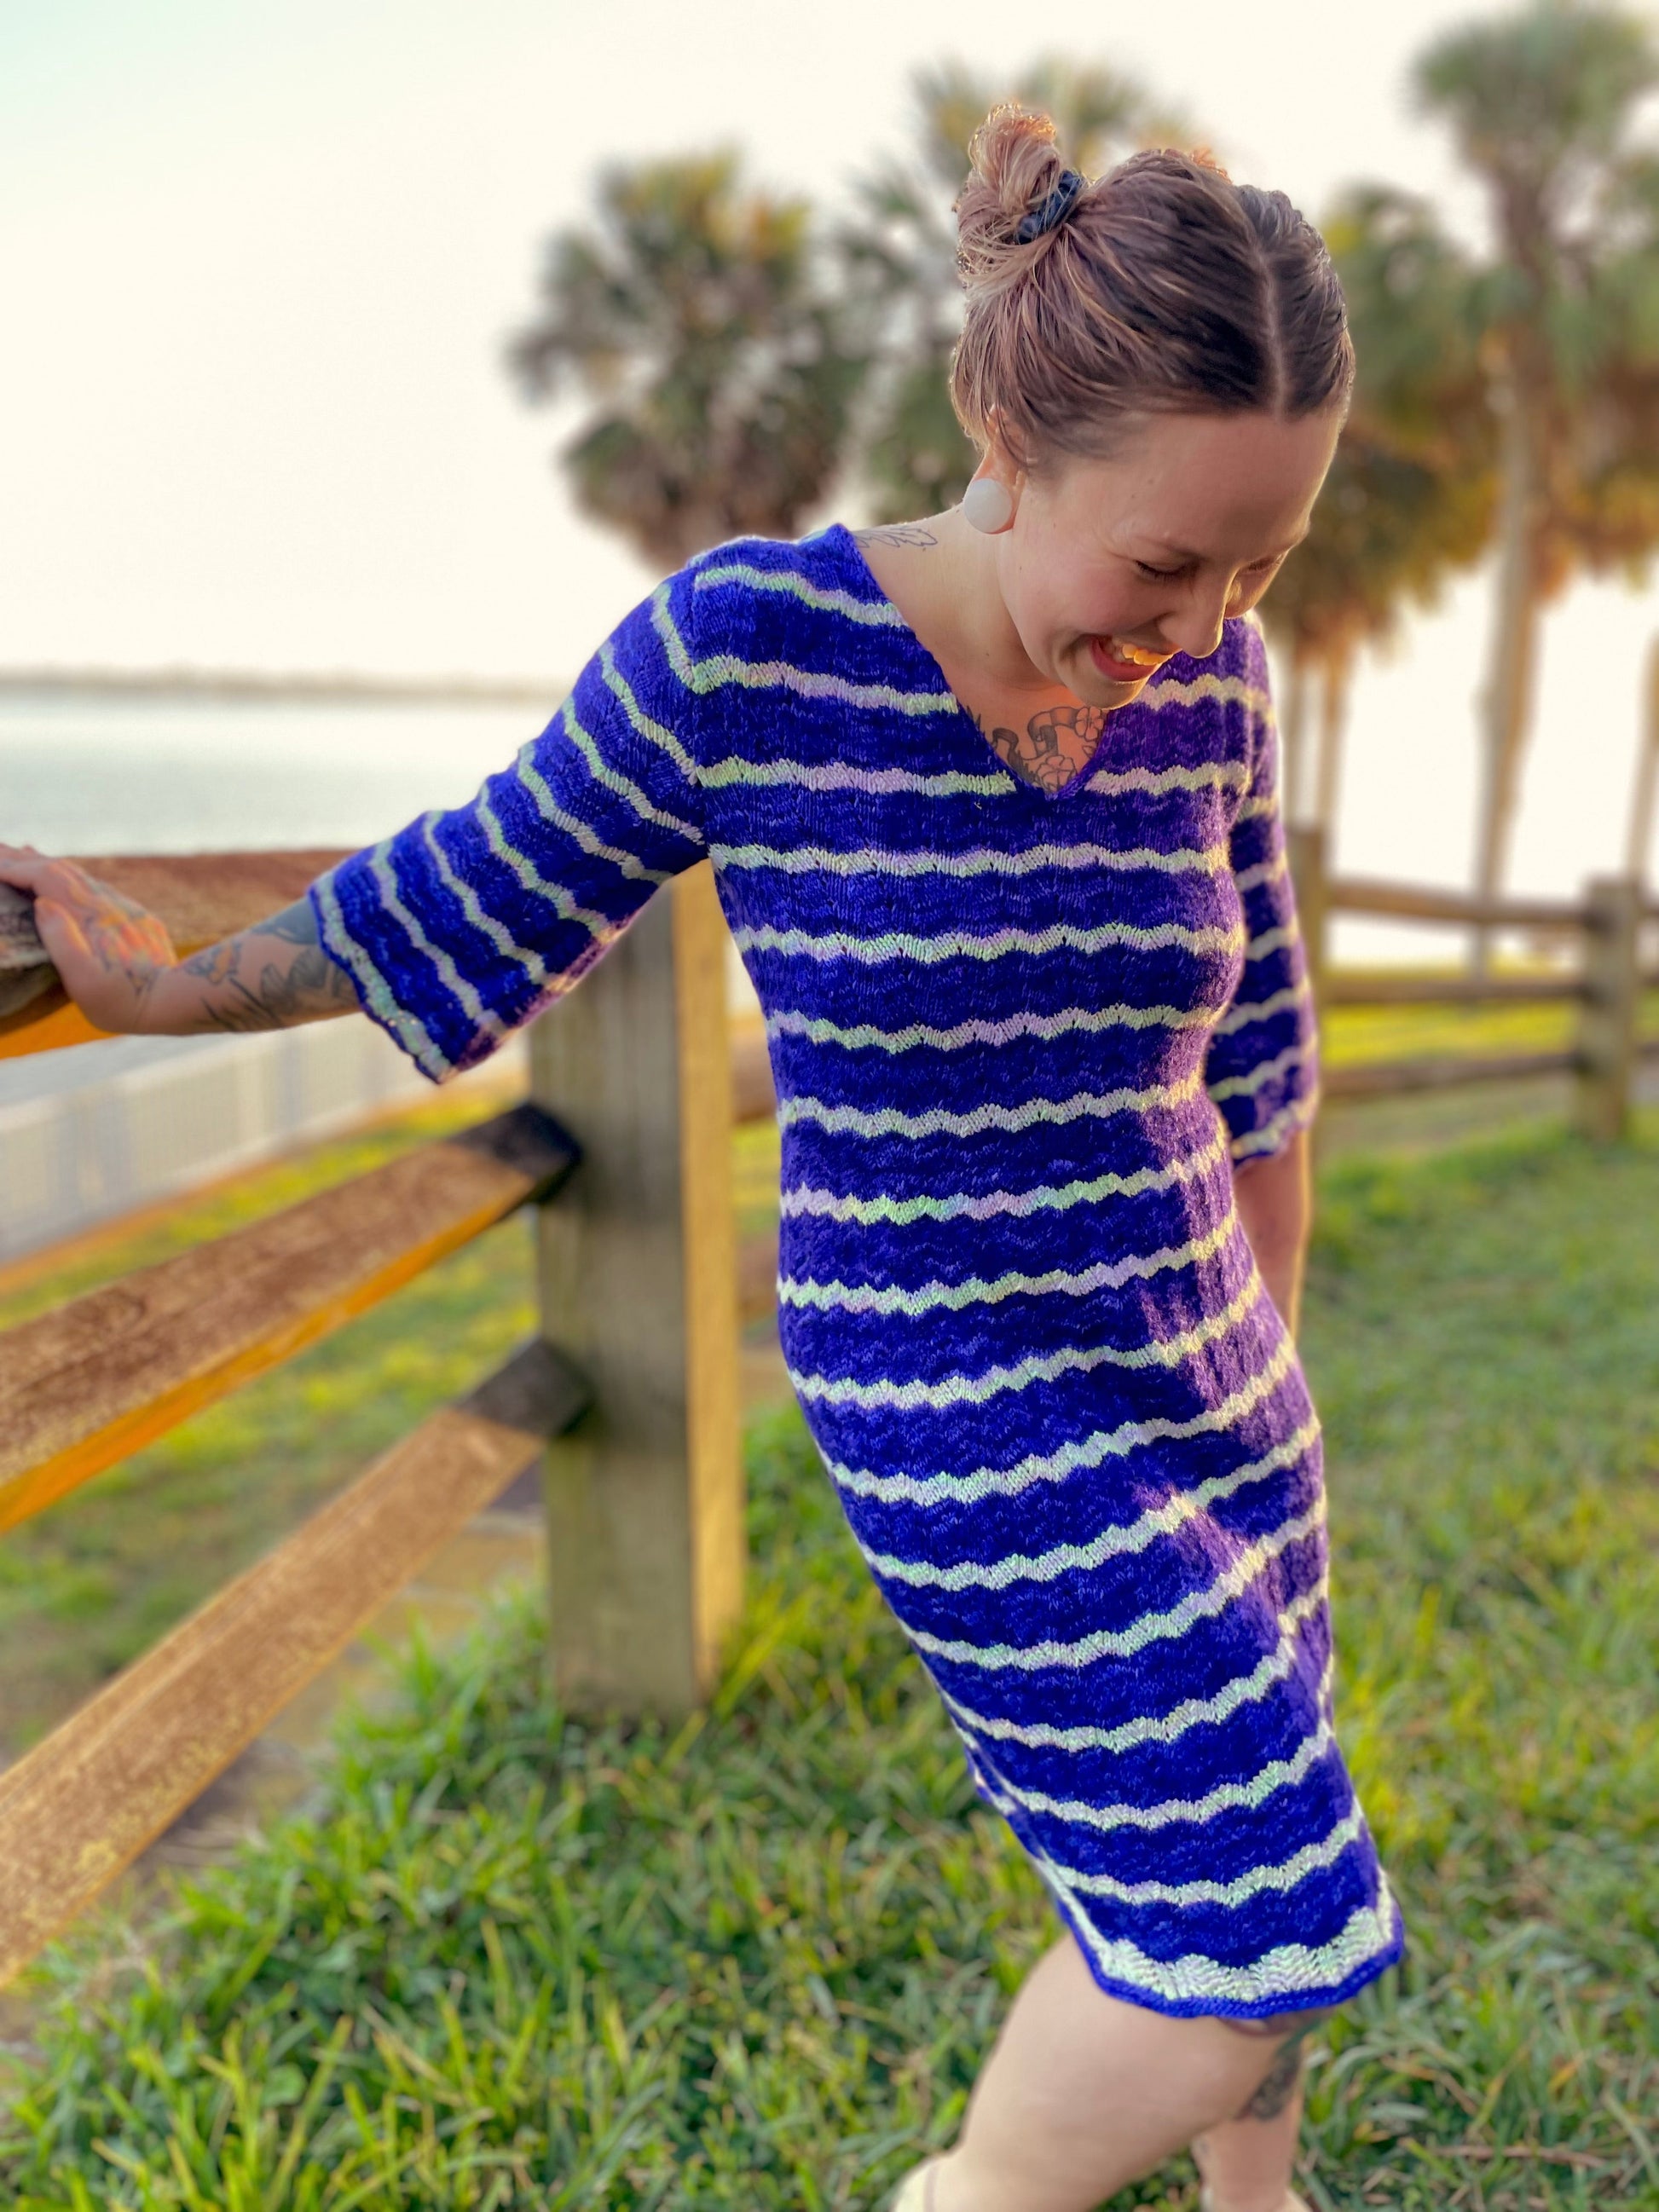 Bess stands, laughing, next to a wooden fence on the shoreline. She wears a hand knit blue and white dress that falls to her knees.